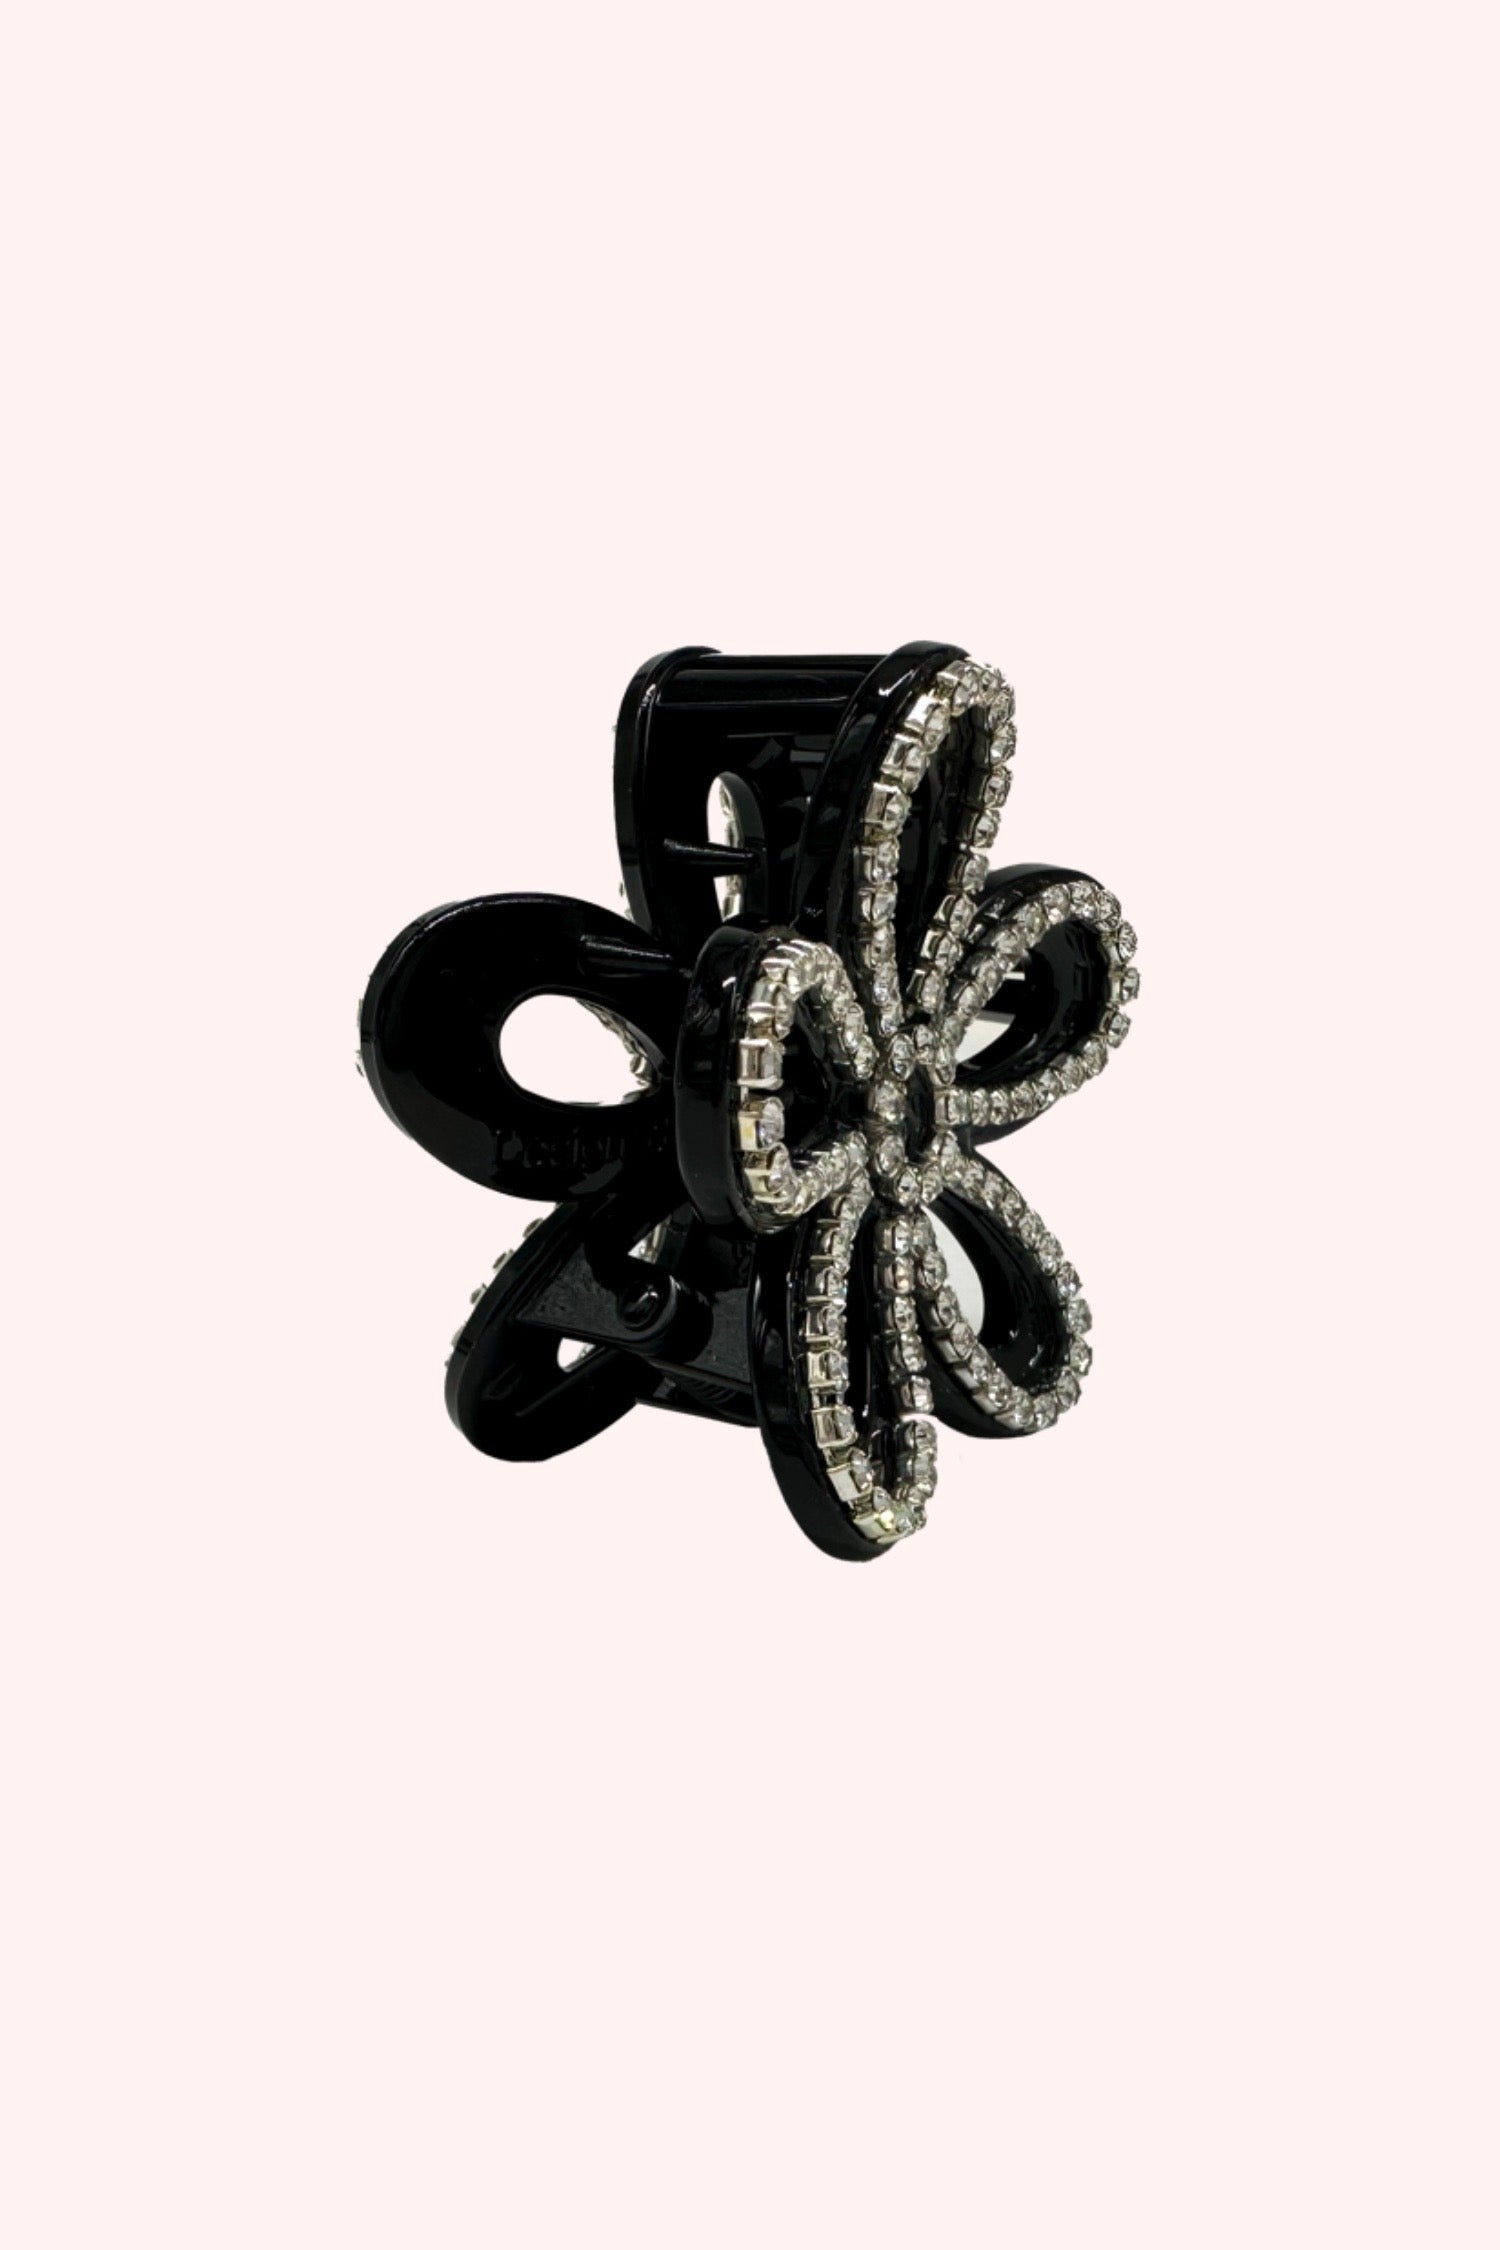 Medium Gemstone Flower Jaw Clip, a 2 petal flower are the handles for a mechanism with strong grip